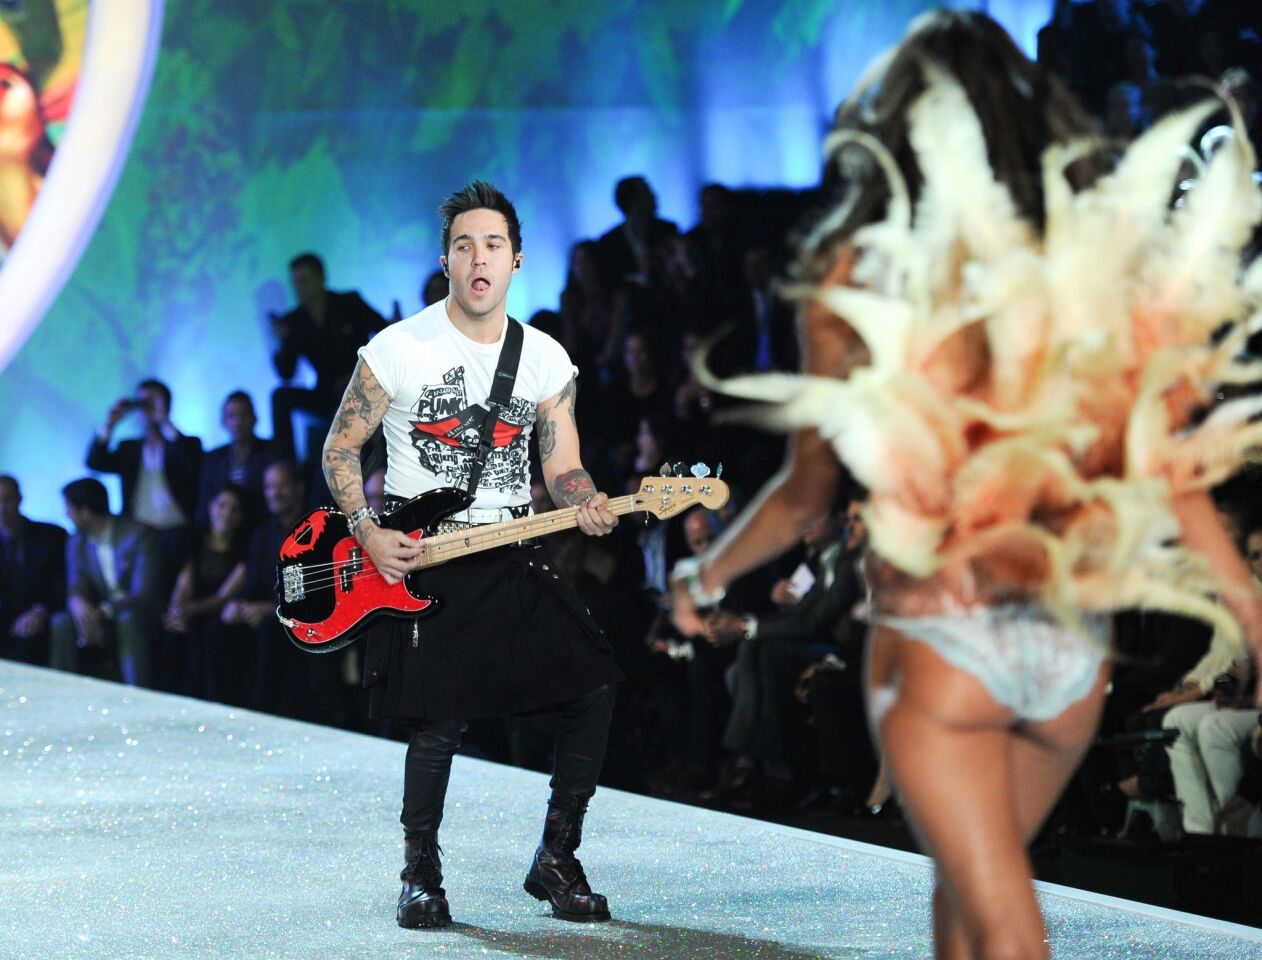 Musician Pete Wentz of Fall Out Boy performs as a model walks the runway at the 2013 Victoria's Secret Fashion Show on Wednesday in New York.